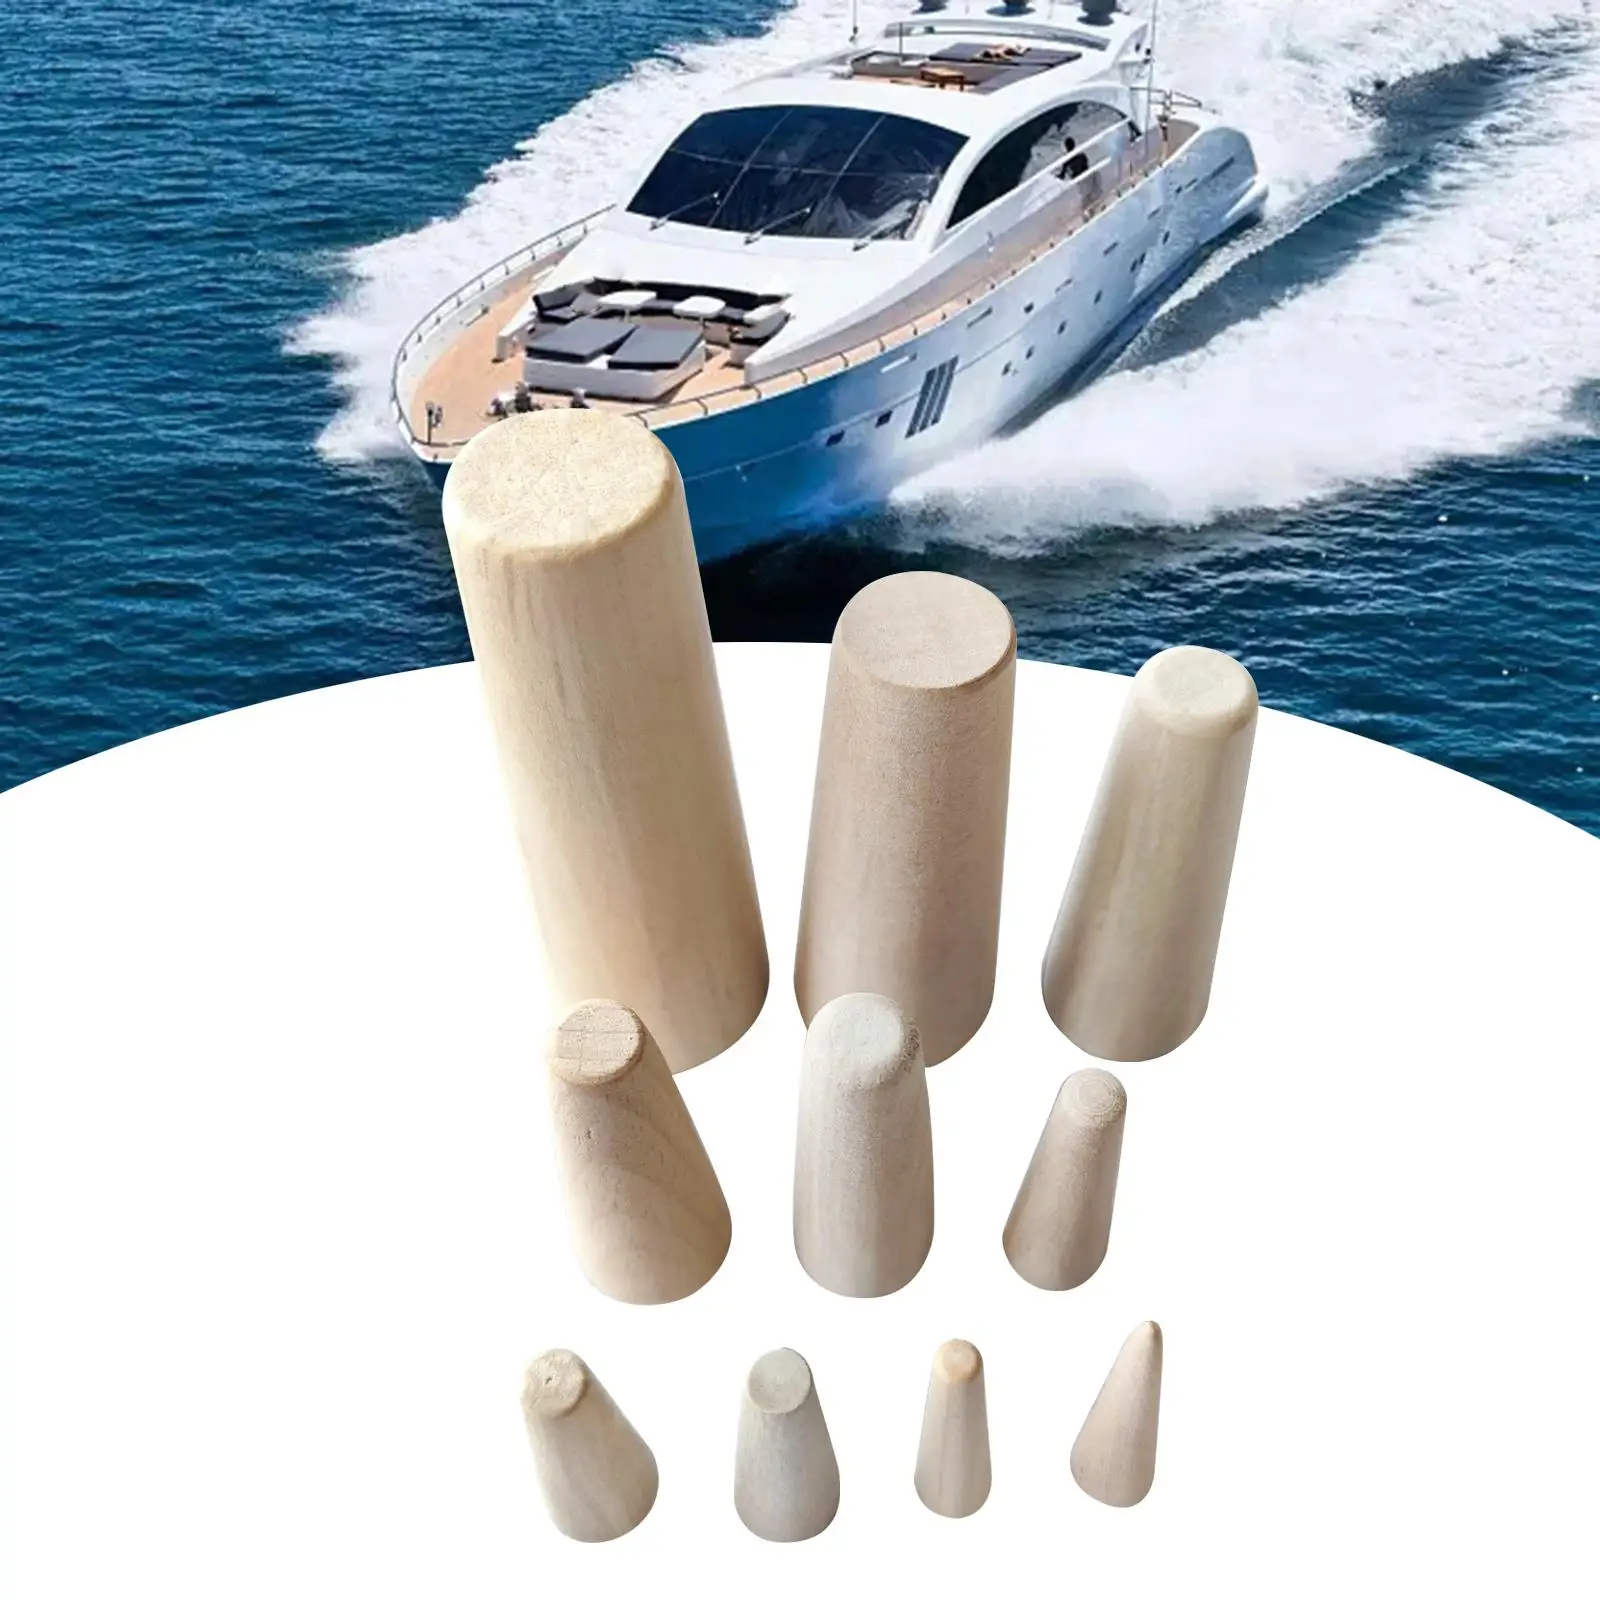 10x Boat Emergency Wood Plugs Durable Wooden Bungs for Boat Yacht Ships